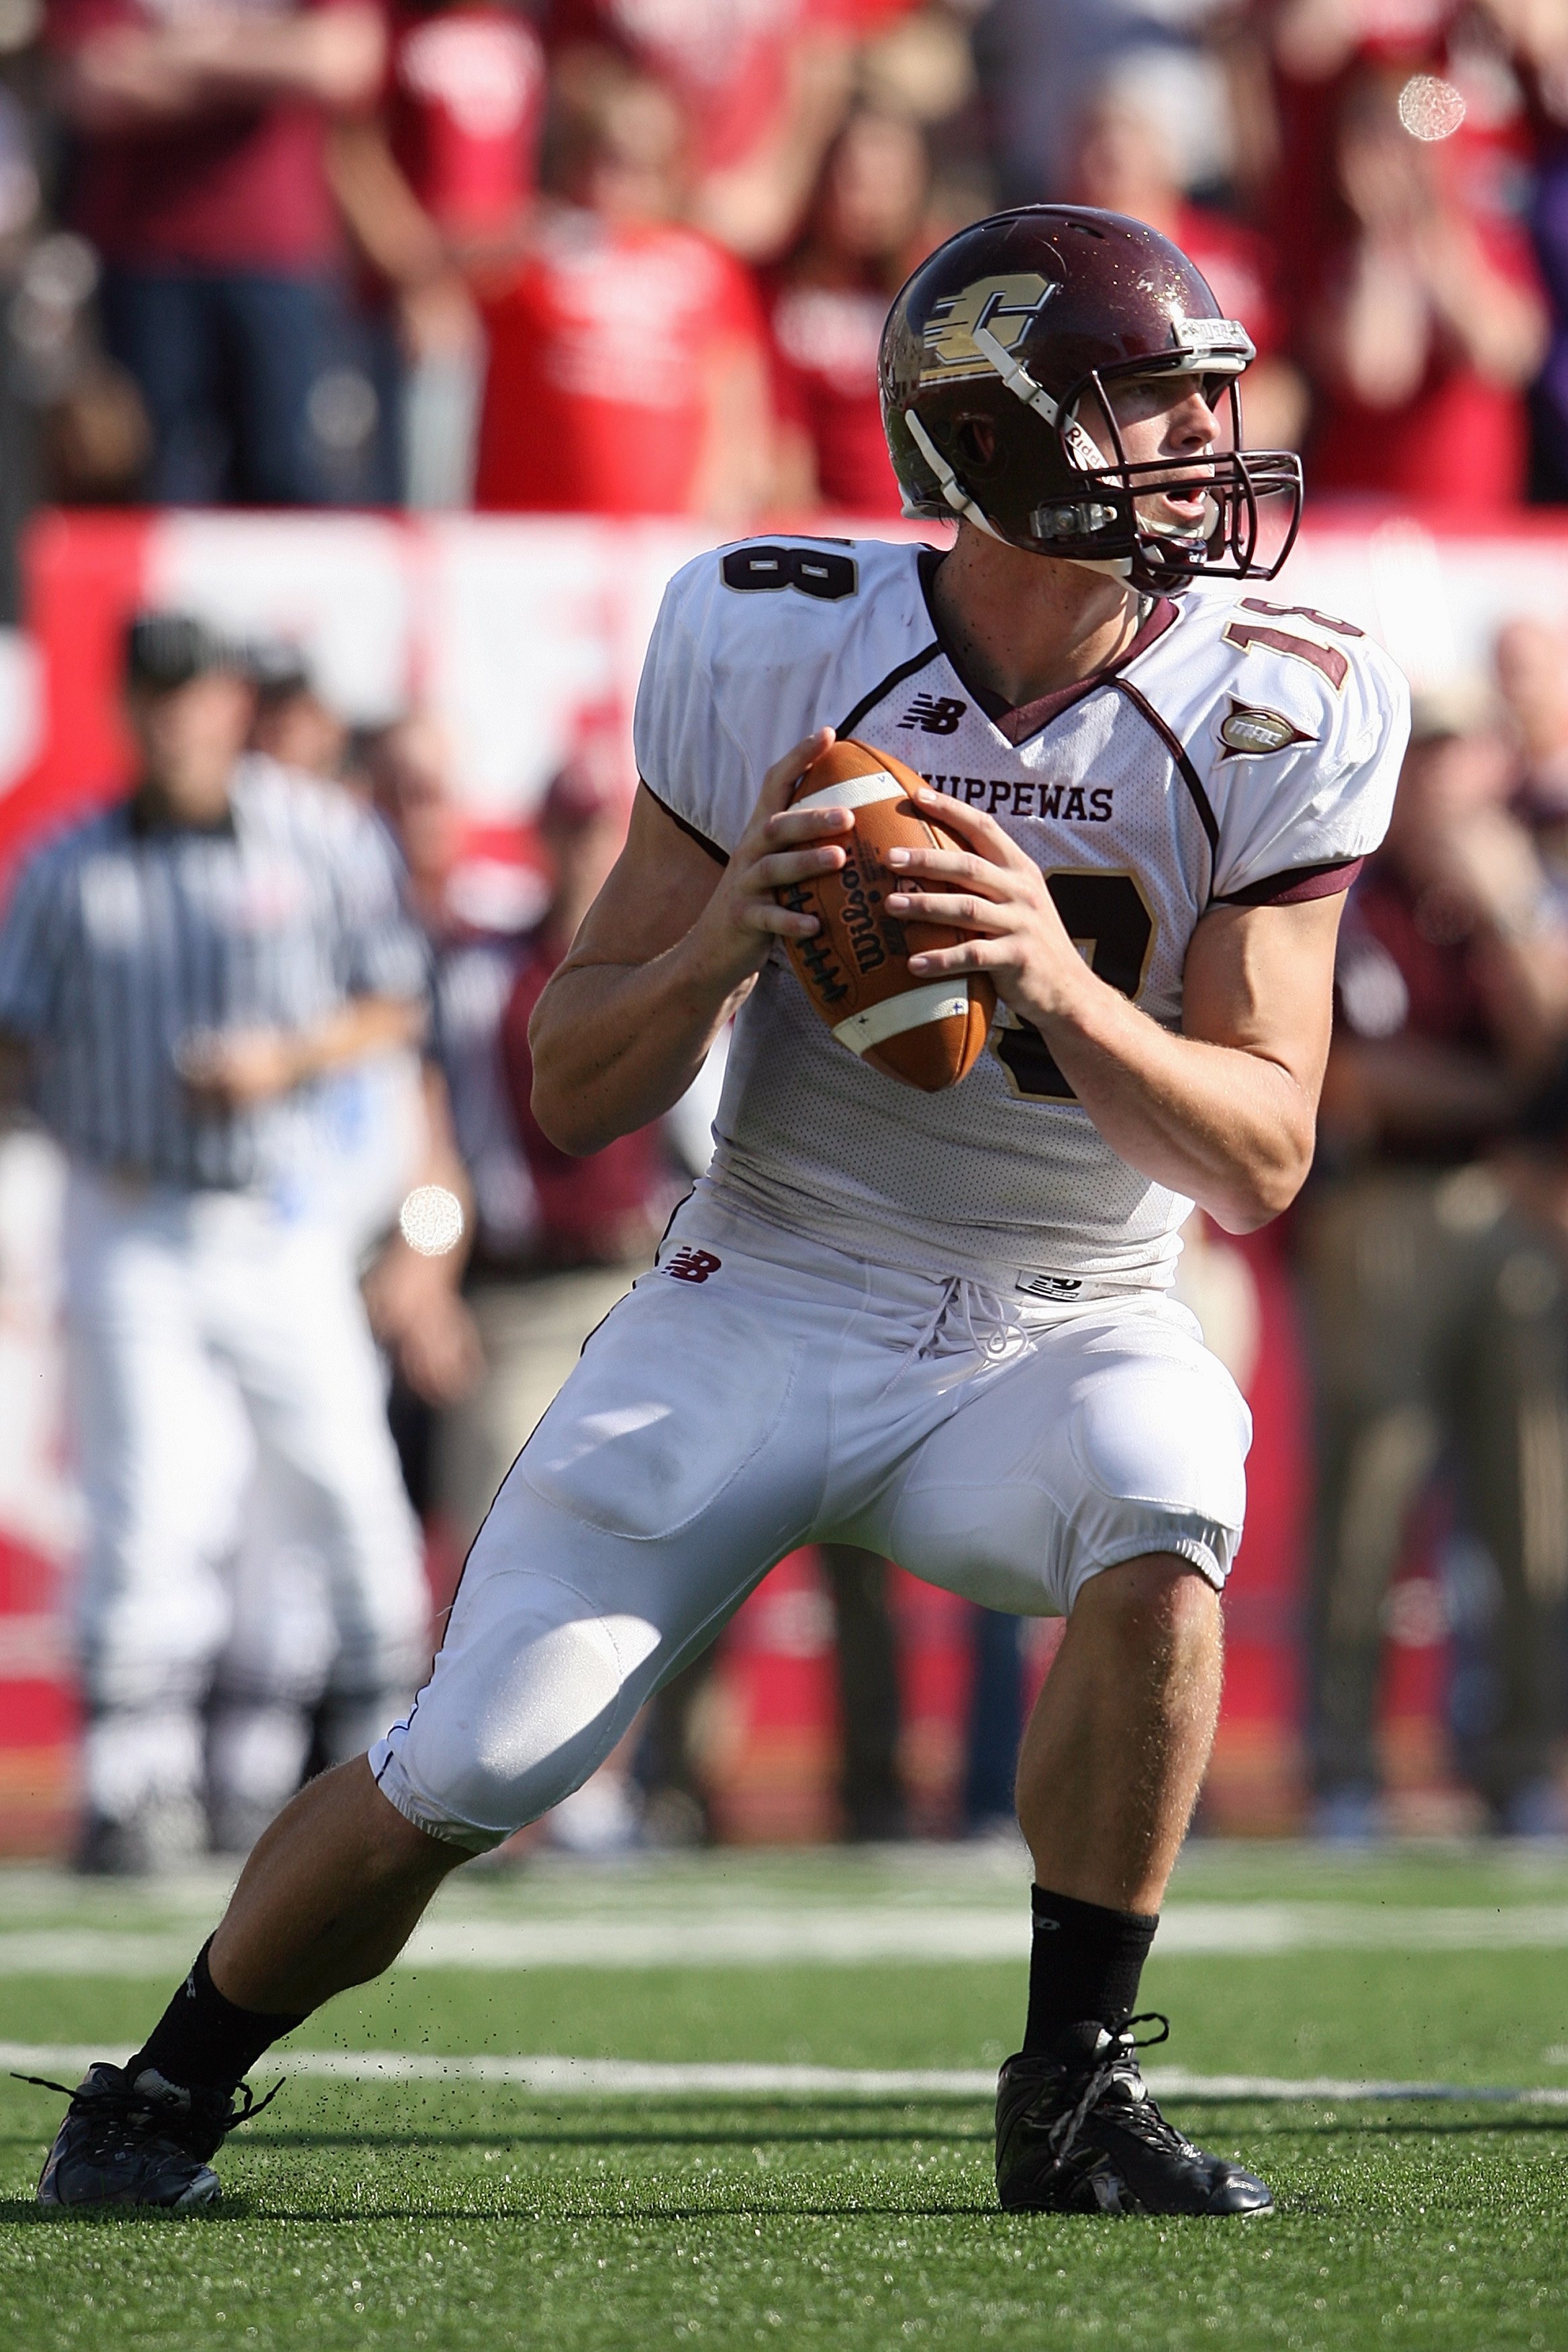 BLOOMINGTON, IN - NOVEMBER 01:  Quarterback Brian Brunner #18 of the Central Michigan Chippewas passes the ball during the game against the Indiana Hooisers at Memorial Stadium on November 1, 2008 in Bloomington, Indiana.  (Photo by Andy Lyons/Getty Image